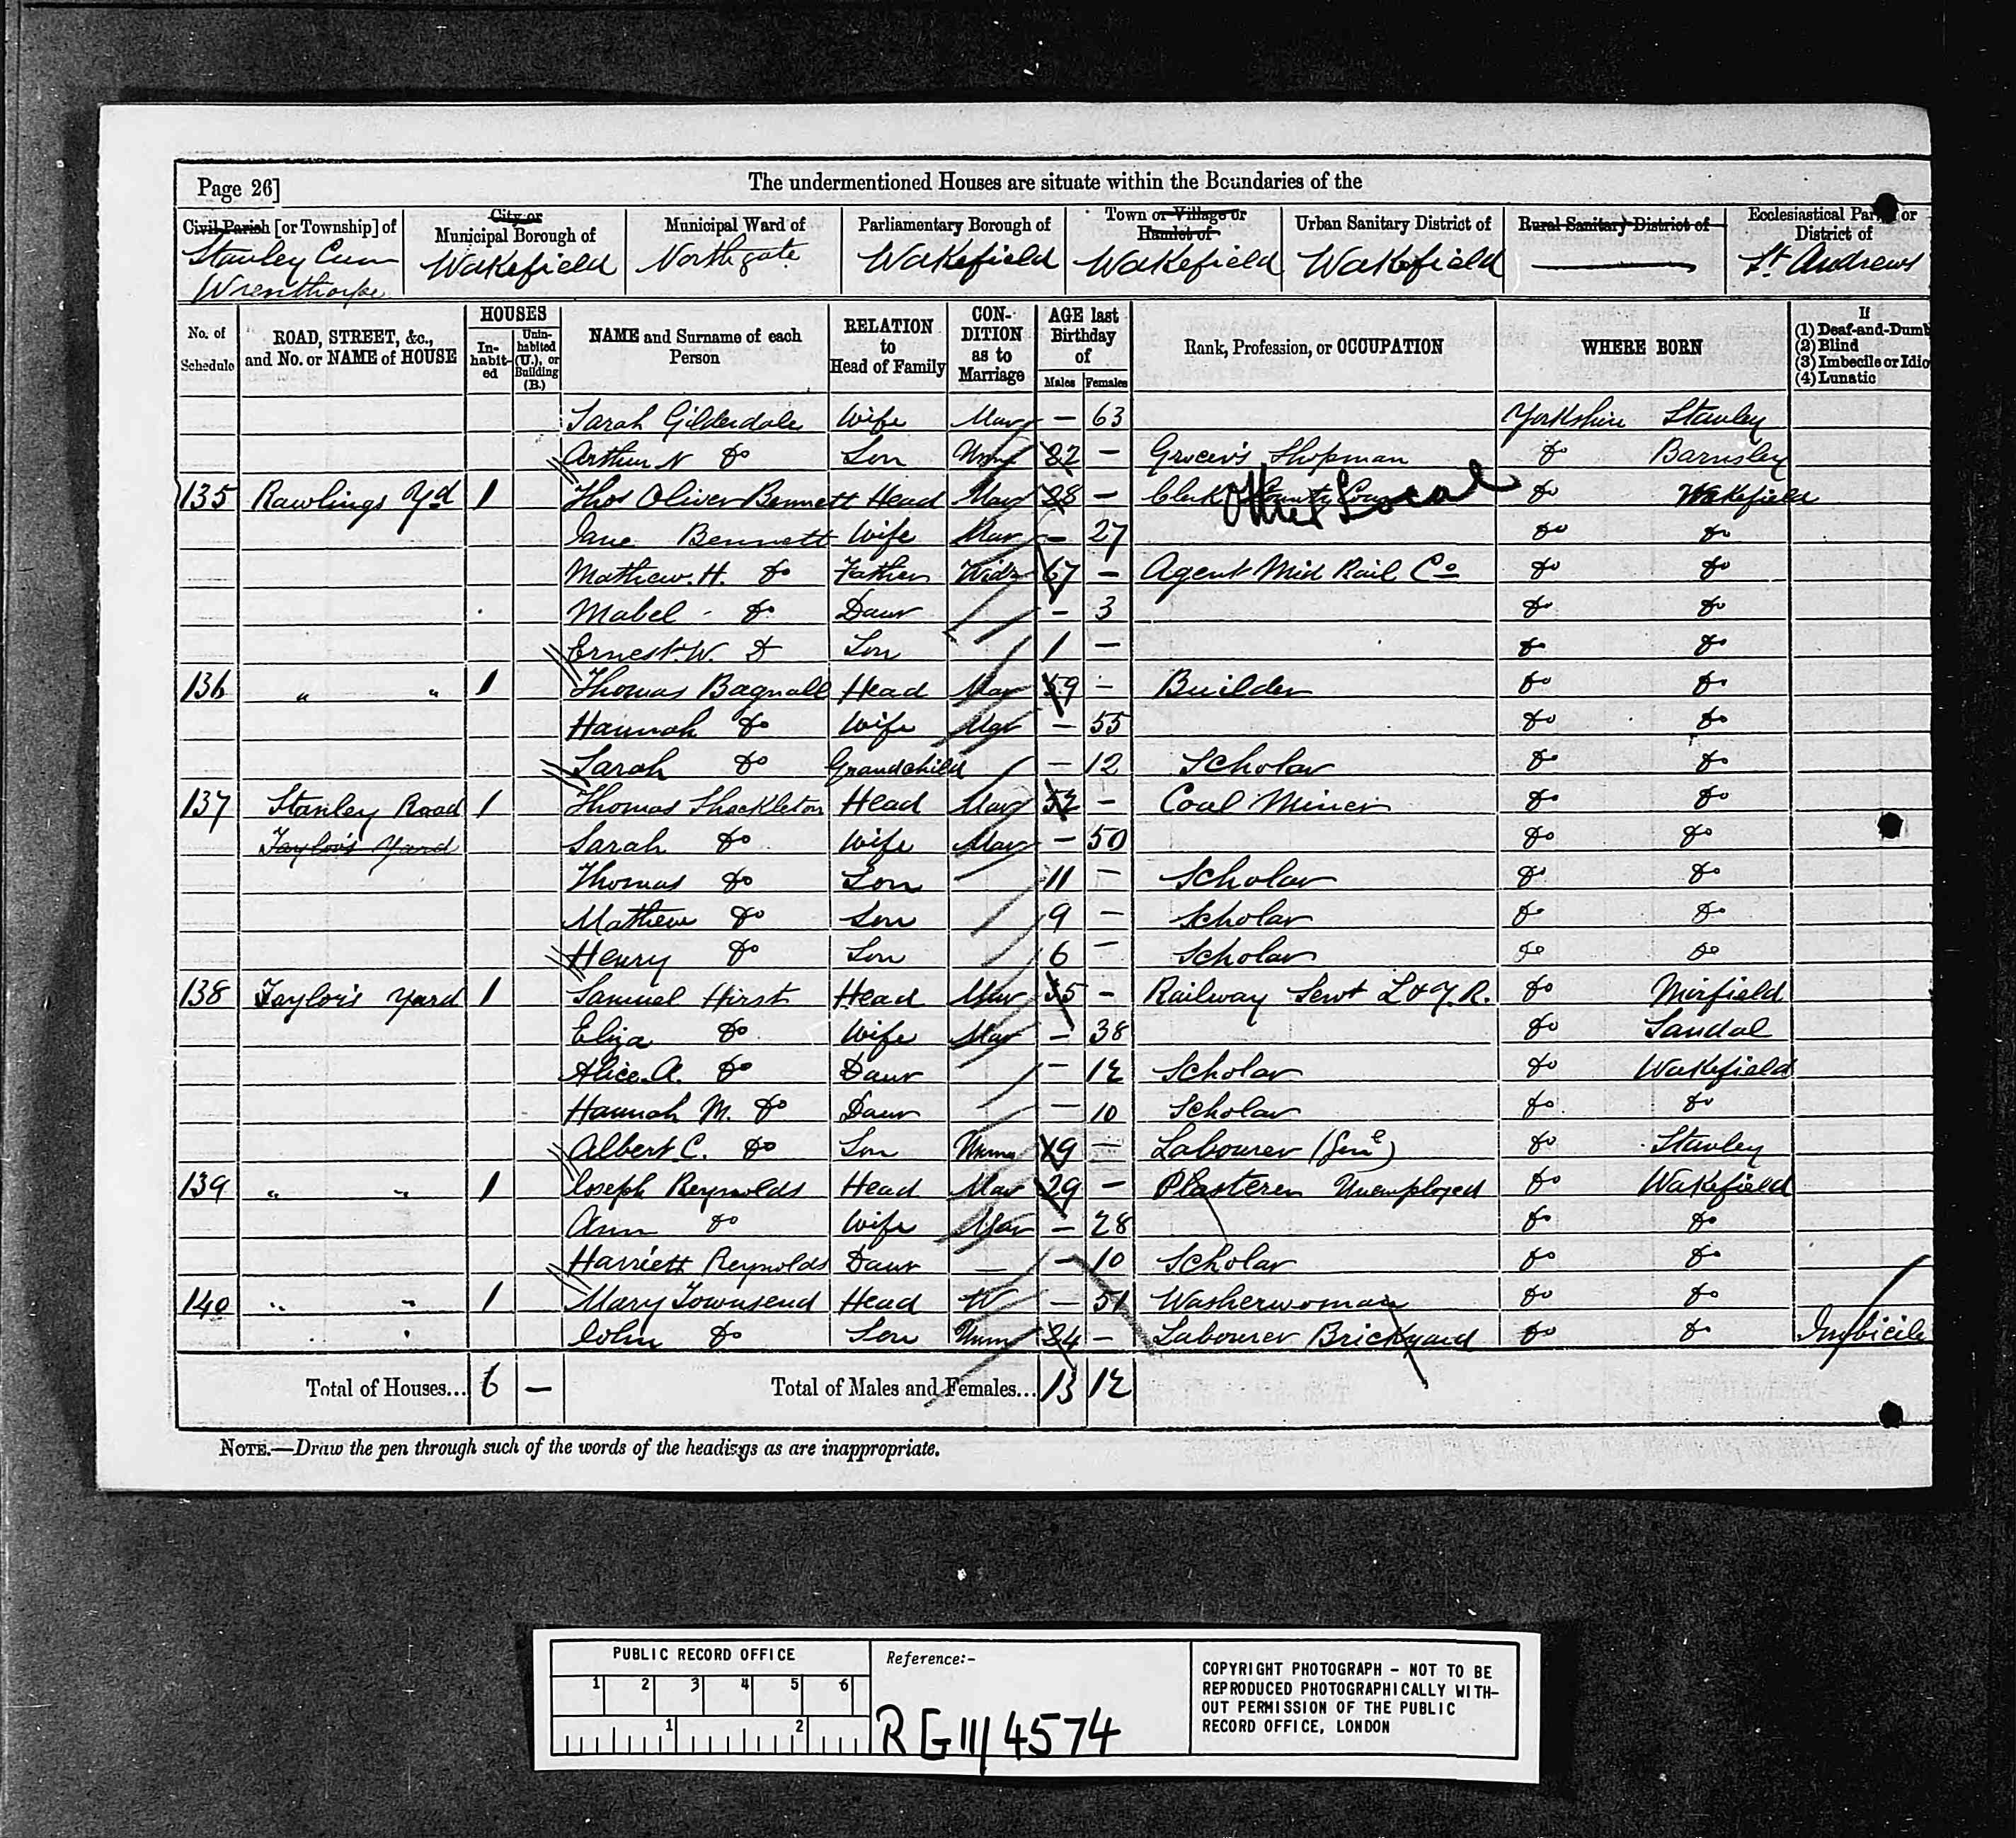 1881 Census entry for Thomas and Hannah Bagnall Household